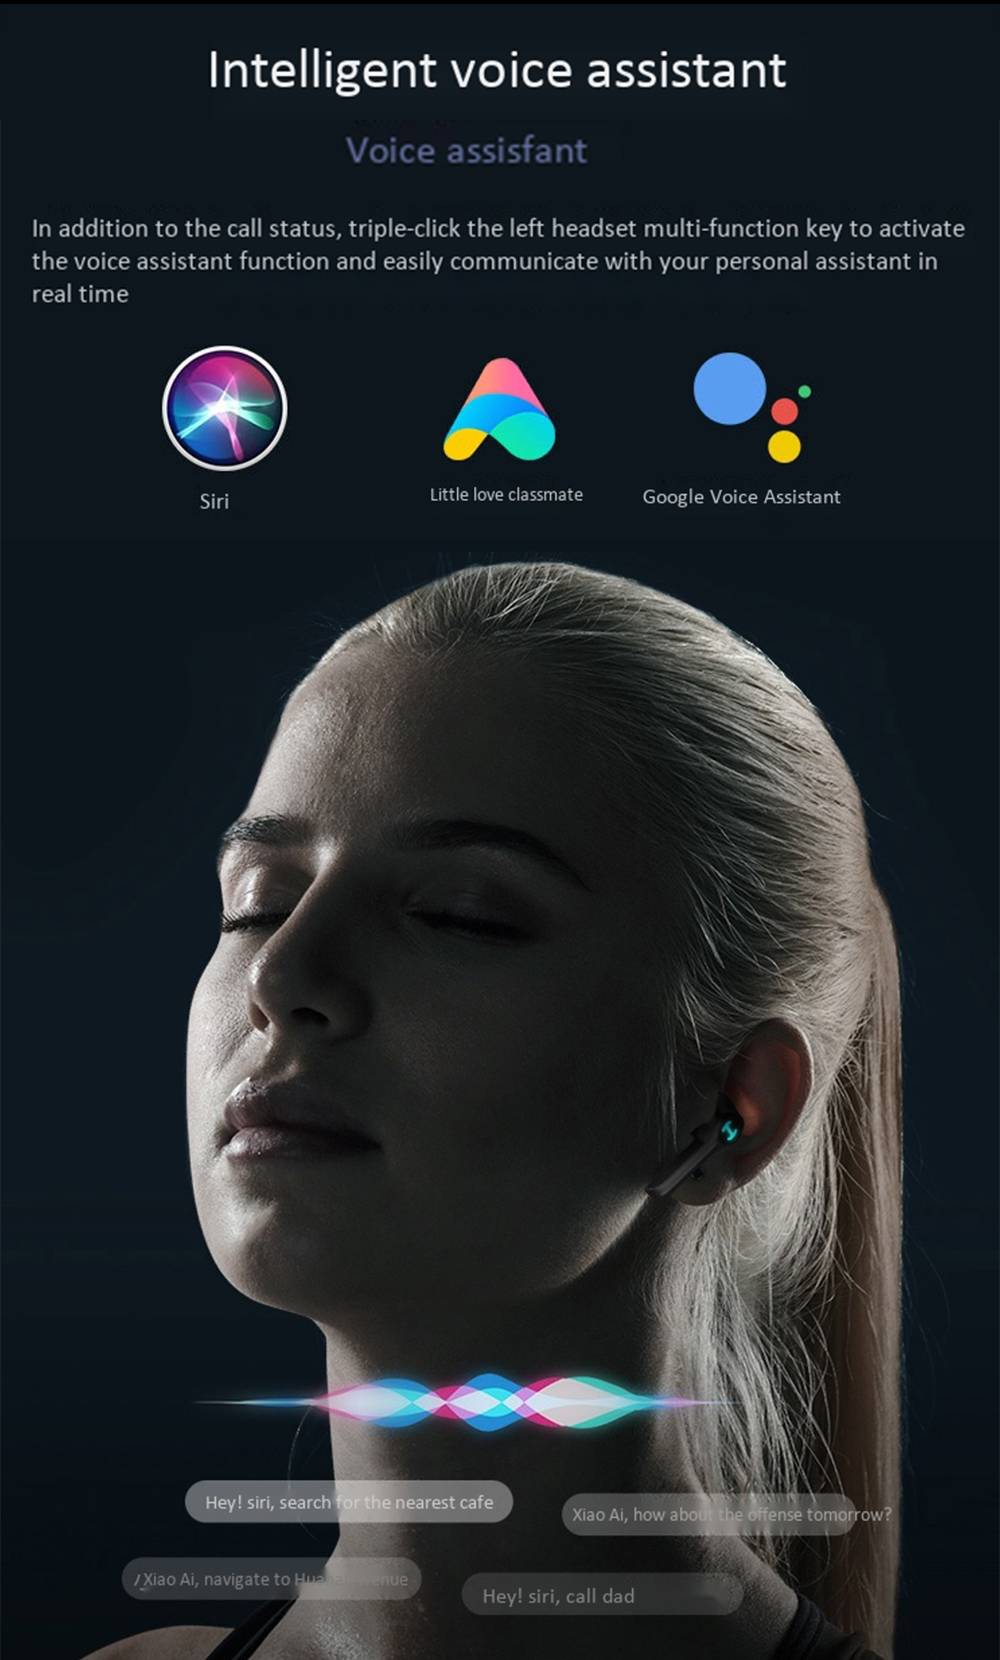 EDIFIER HECATE GM4 Bluetooth 5.0 True Wireless Earphones PAU160X with Ultra-Low Latency Game Mode Google Assistant Siri Used Independently 16 Hours Playback Time - Black